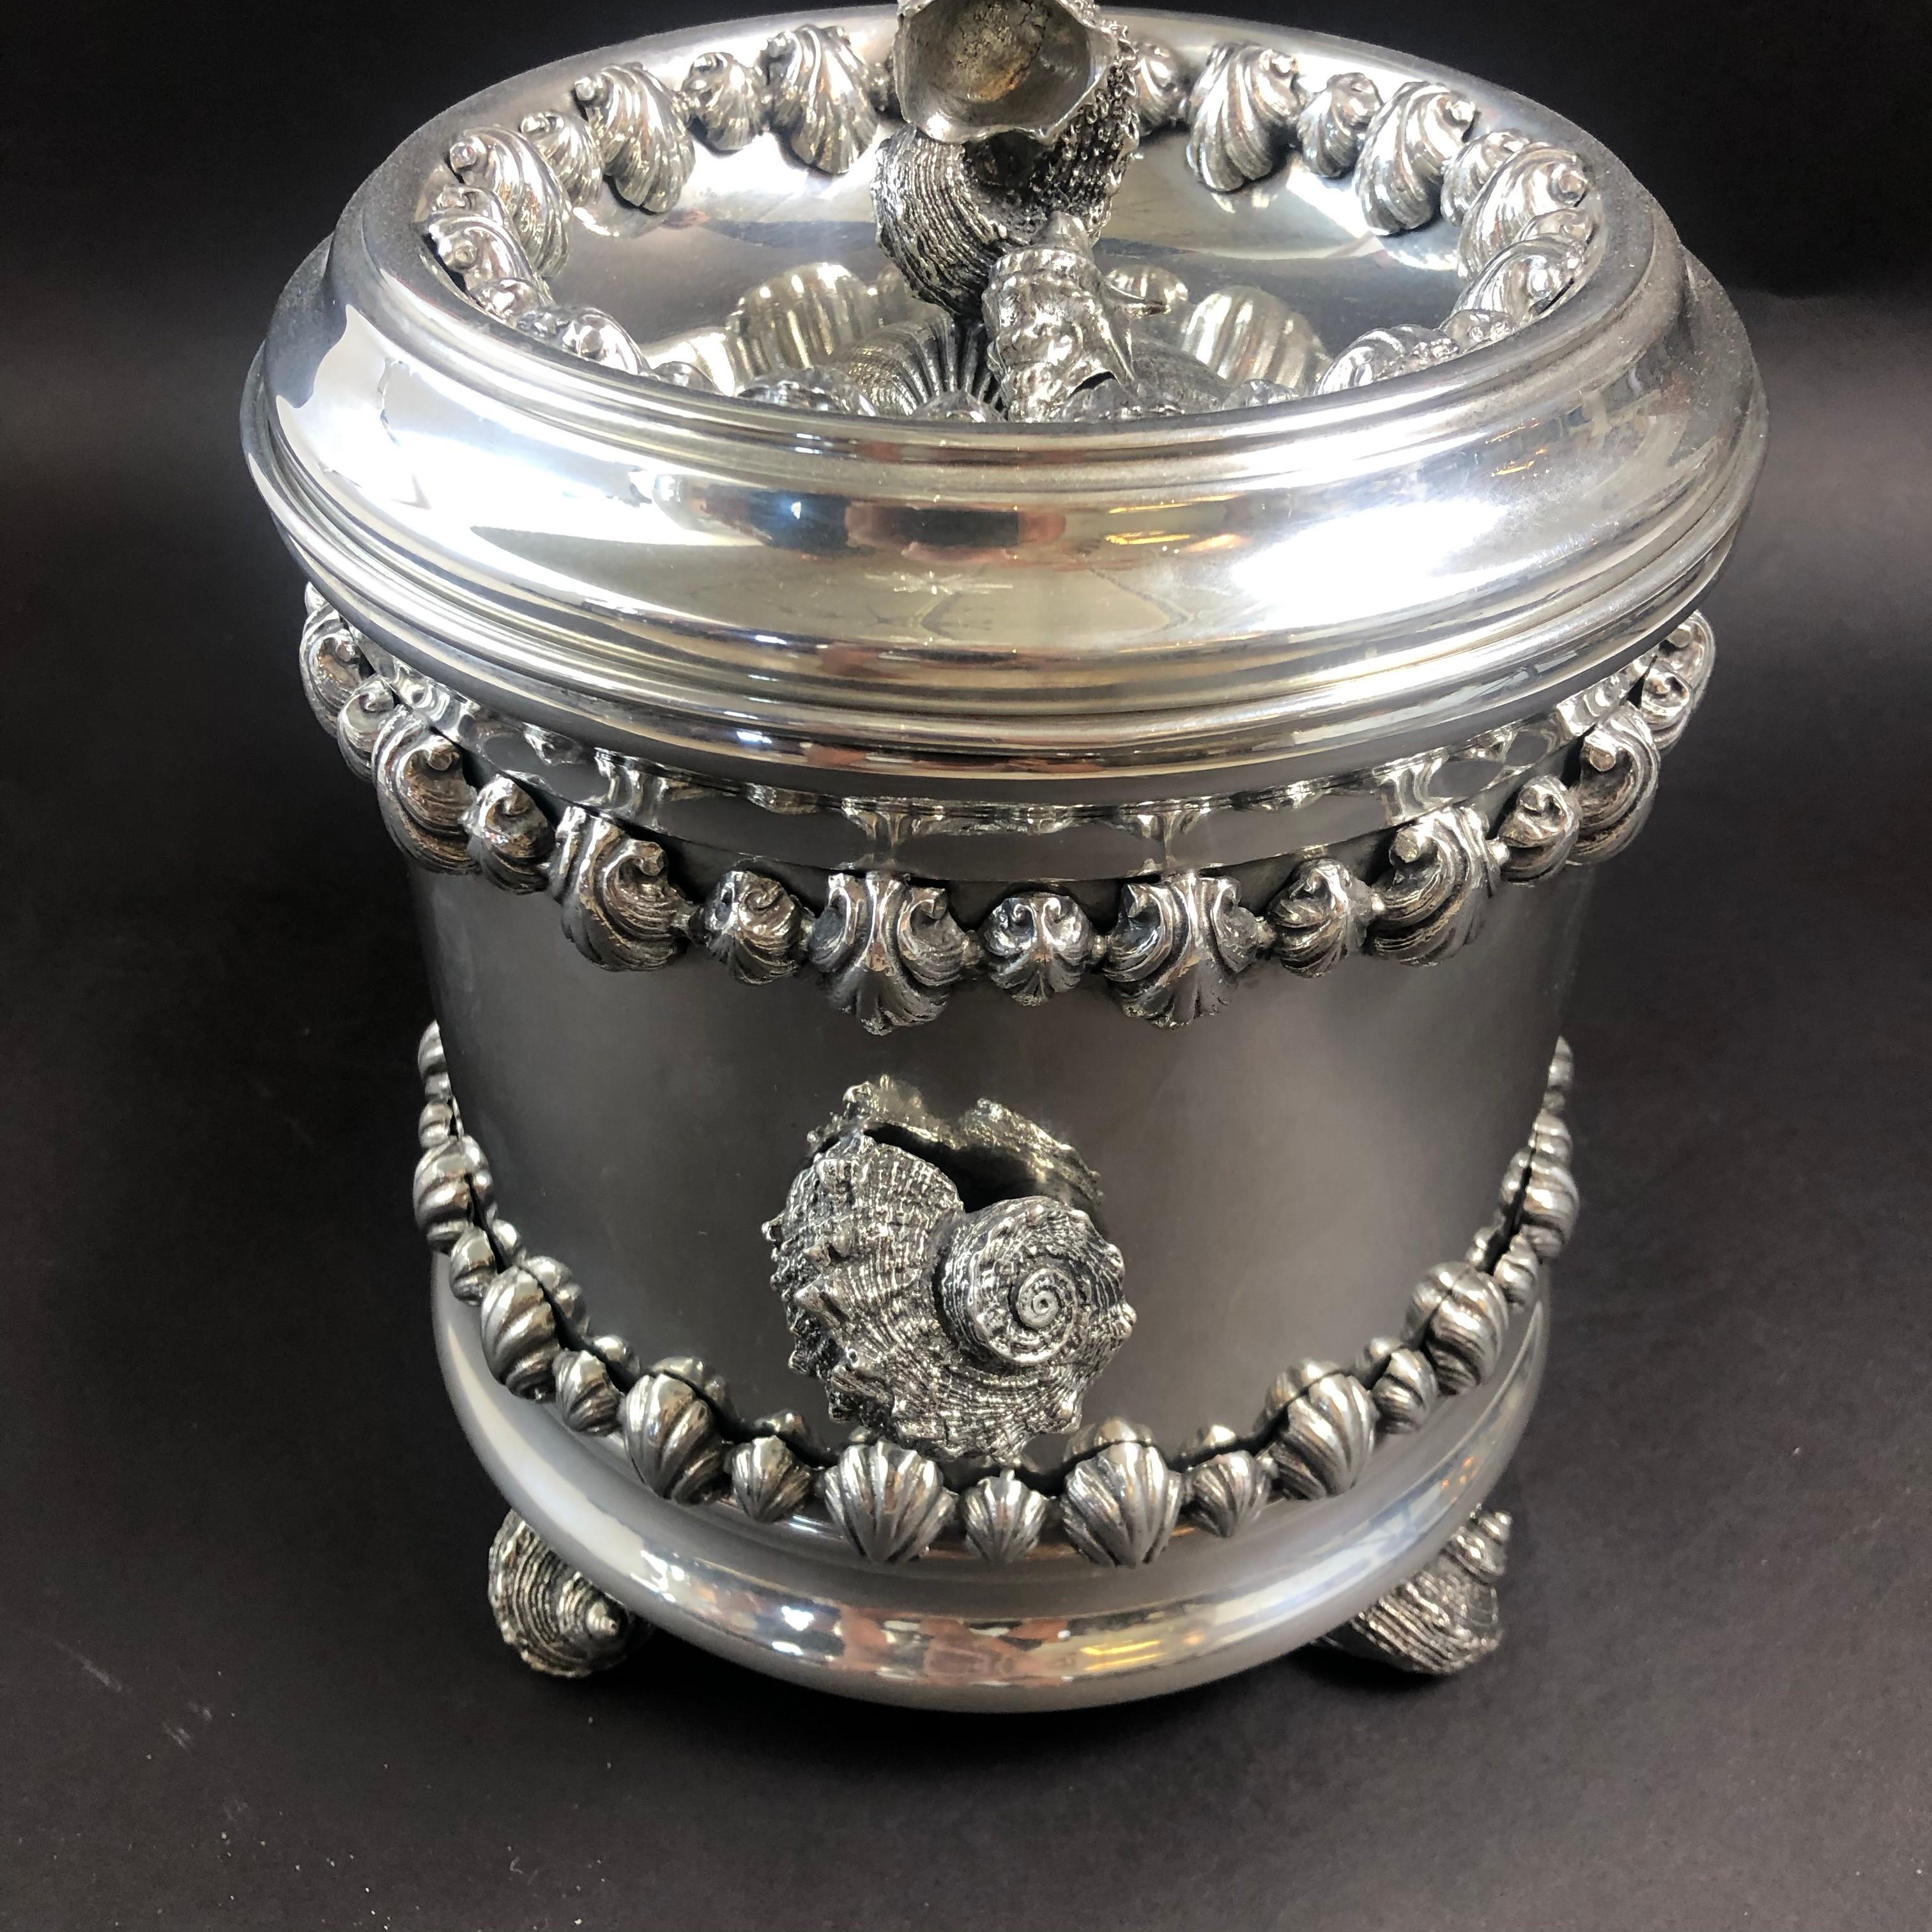 An ornate pewter covered ice bucket, made by Richard Cipolla in Lombardia, Italy. The handmade piece has a beautiful patina. Made with the highest grade pewter. It contains no lead or aluminum alloys. This particular ice bucket has a nautical motif